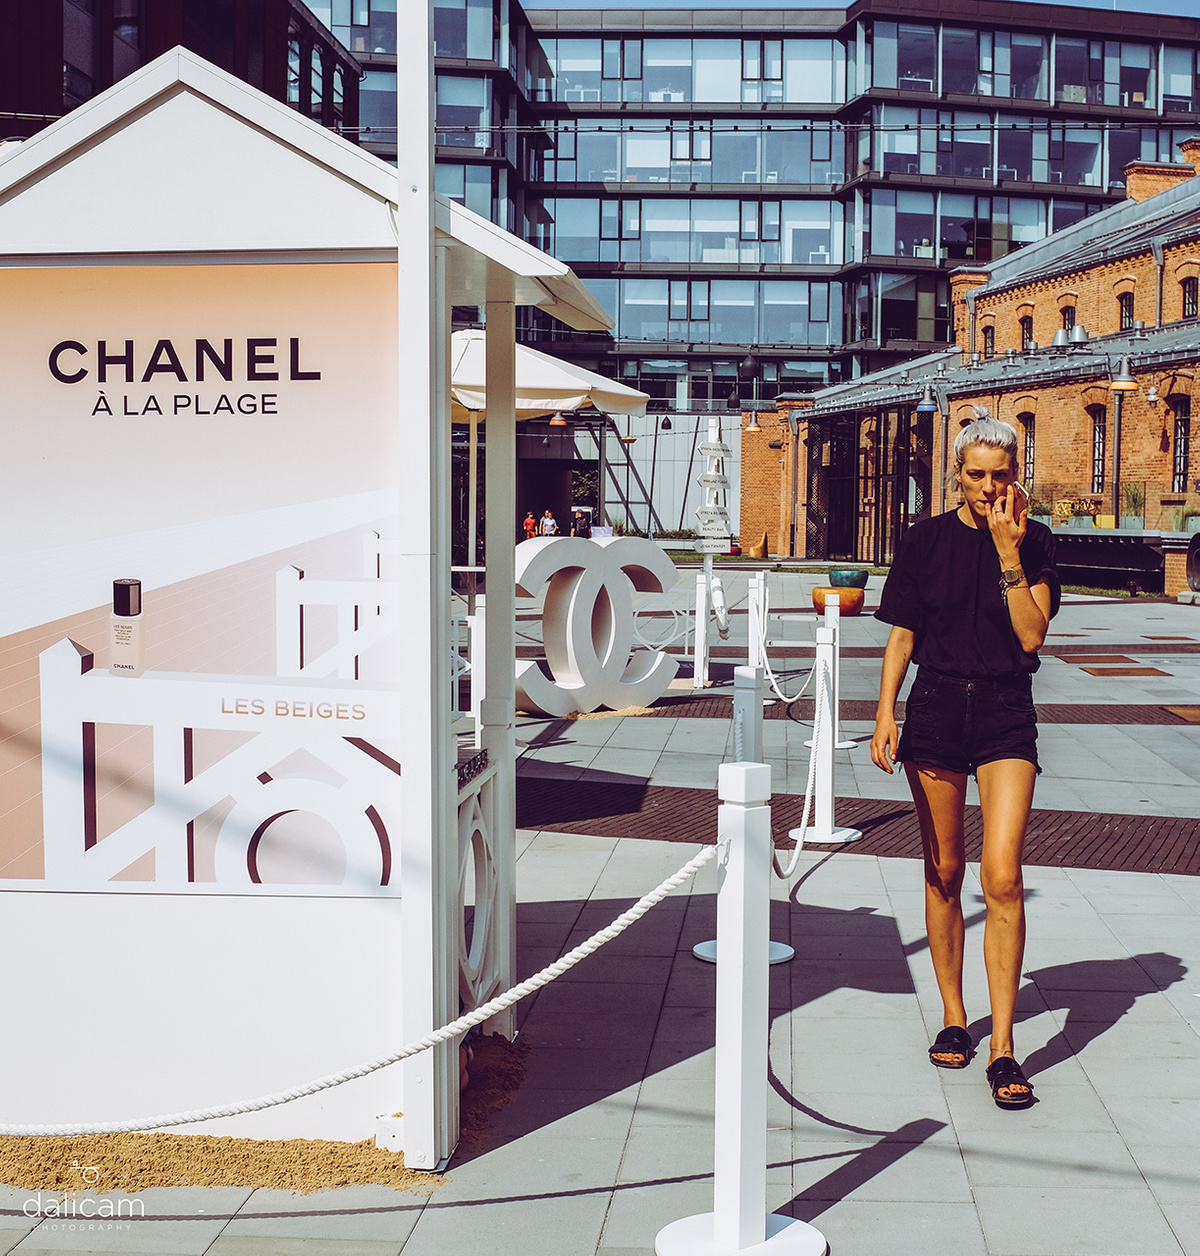 Chanel A La Plage Les Beiges Beauty Cosmetics photos - Dalicam - Street  Style, Commercial and Event Photographer from Poland